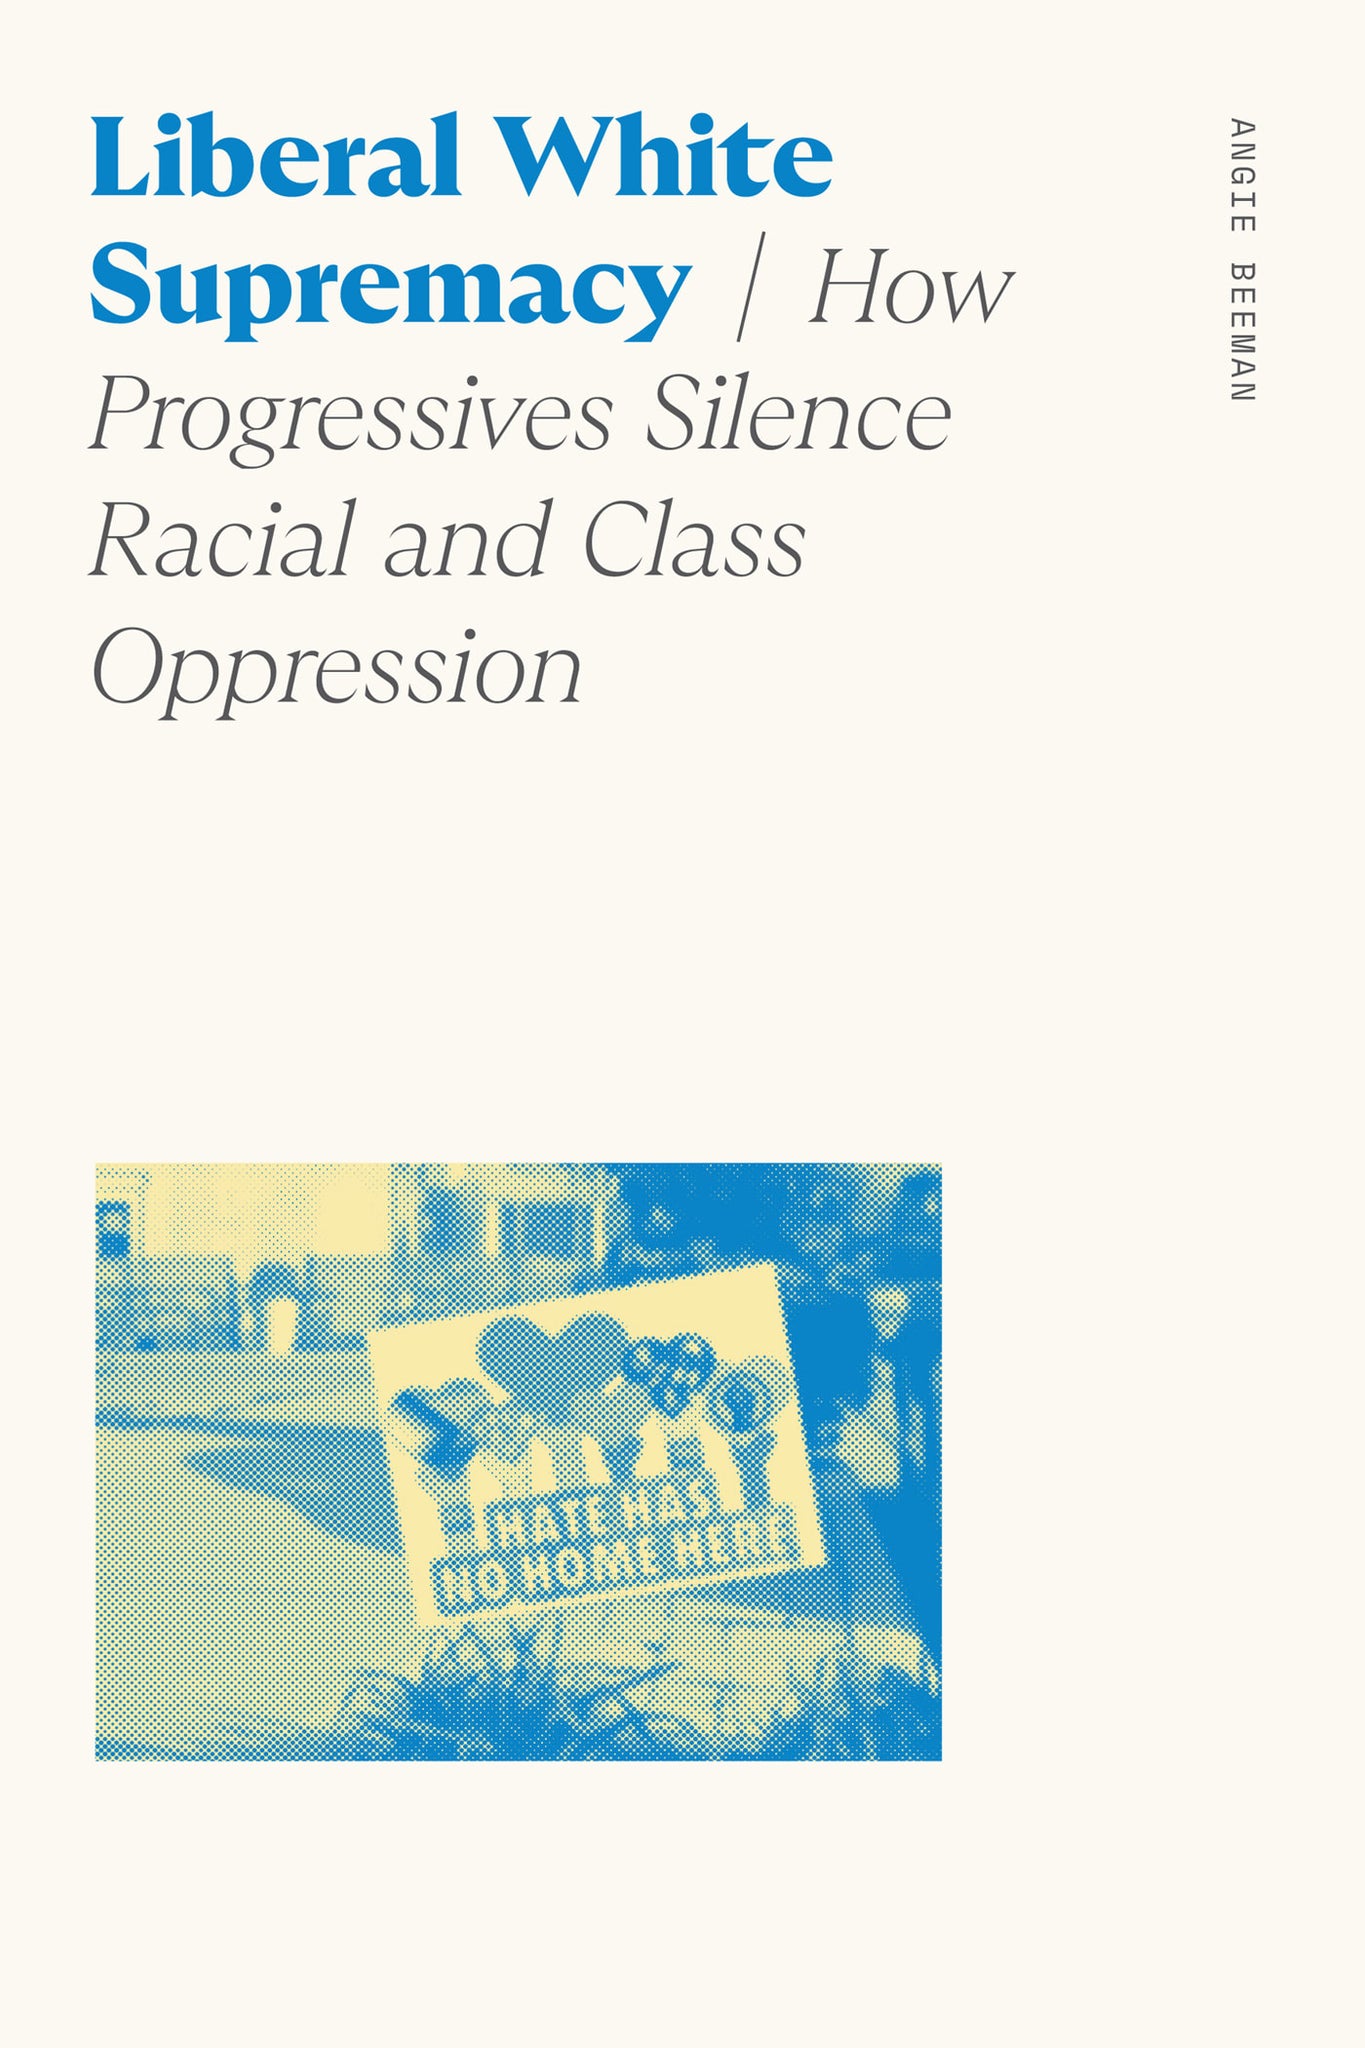 Liberal White Supremacy: How Progressives Silence Racial and Class Oppression (Paperback)